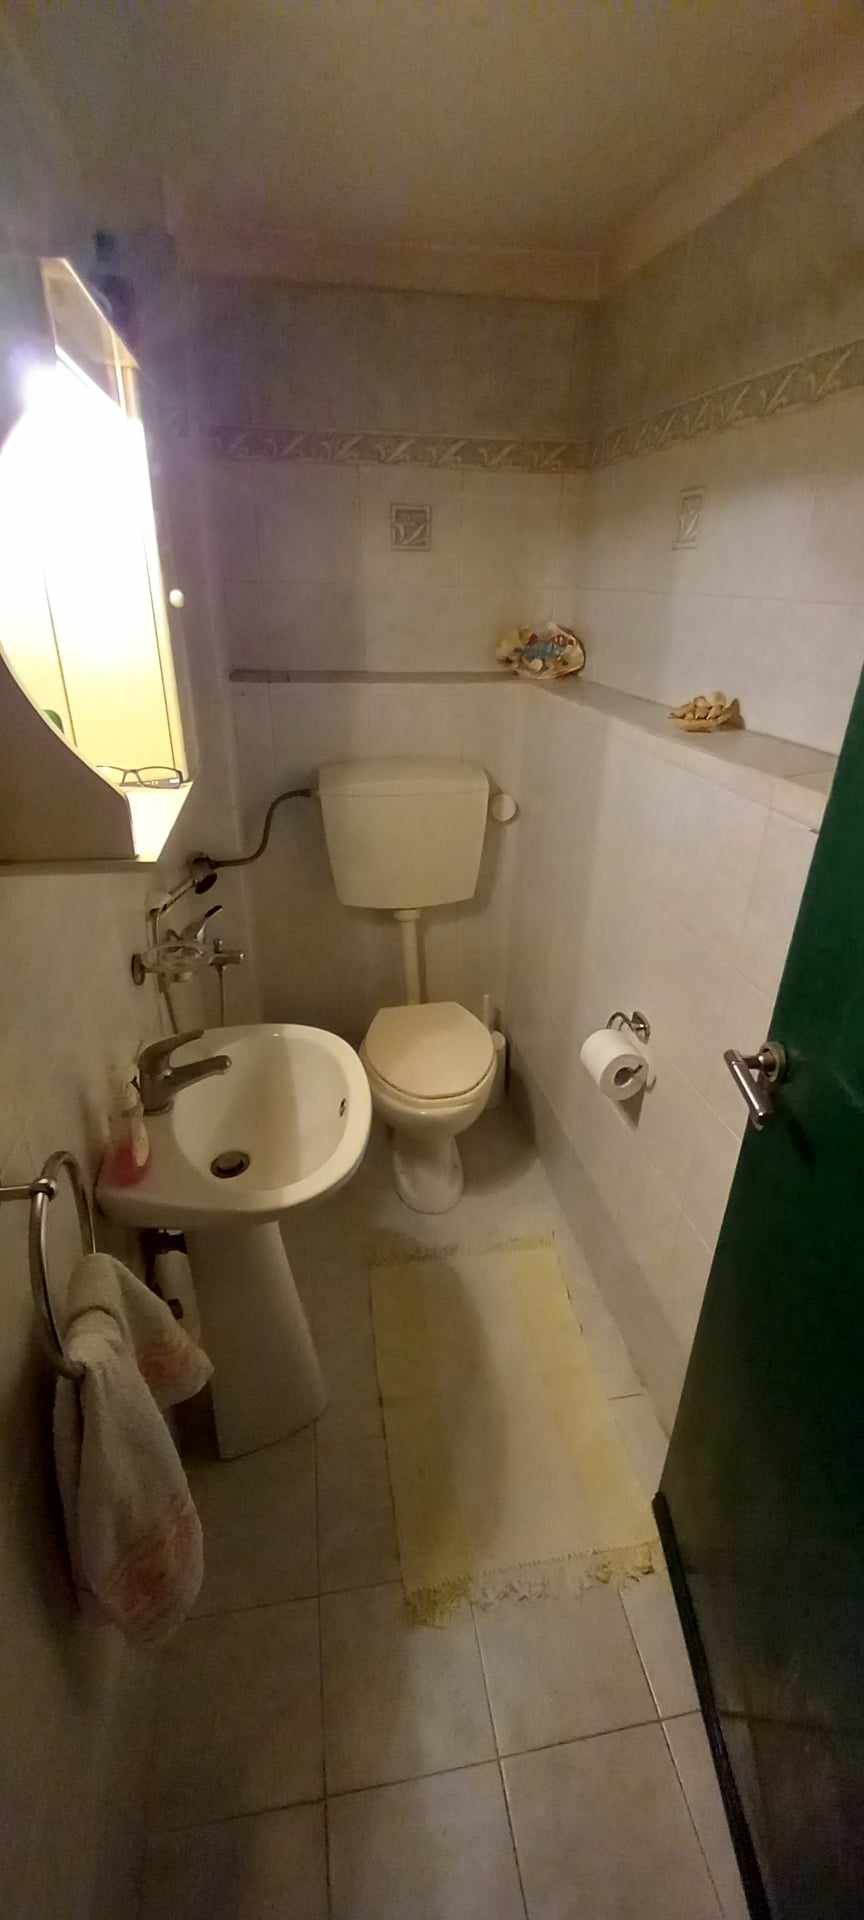 Spacious_three_bedroom_house_with_a_terrace_wc_sink.jpg